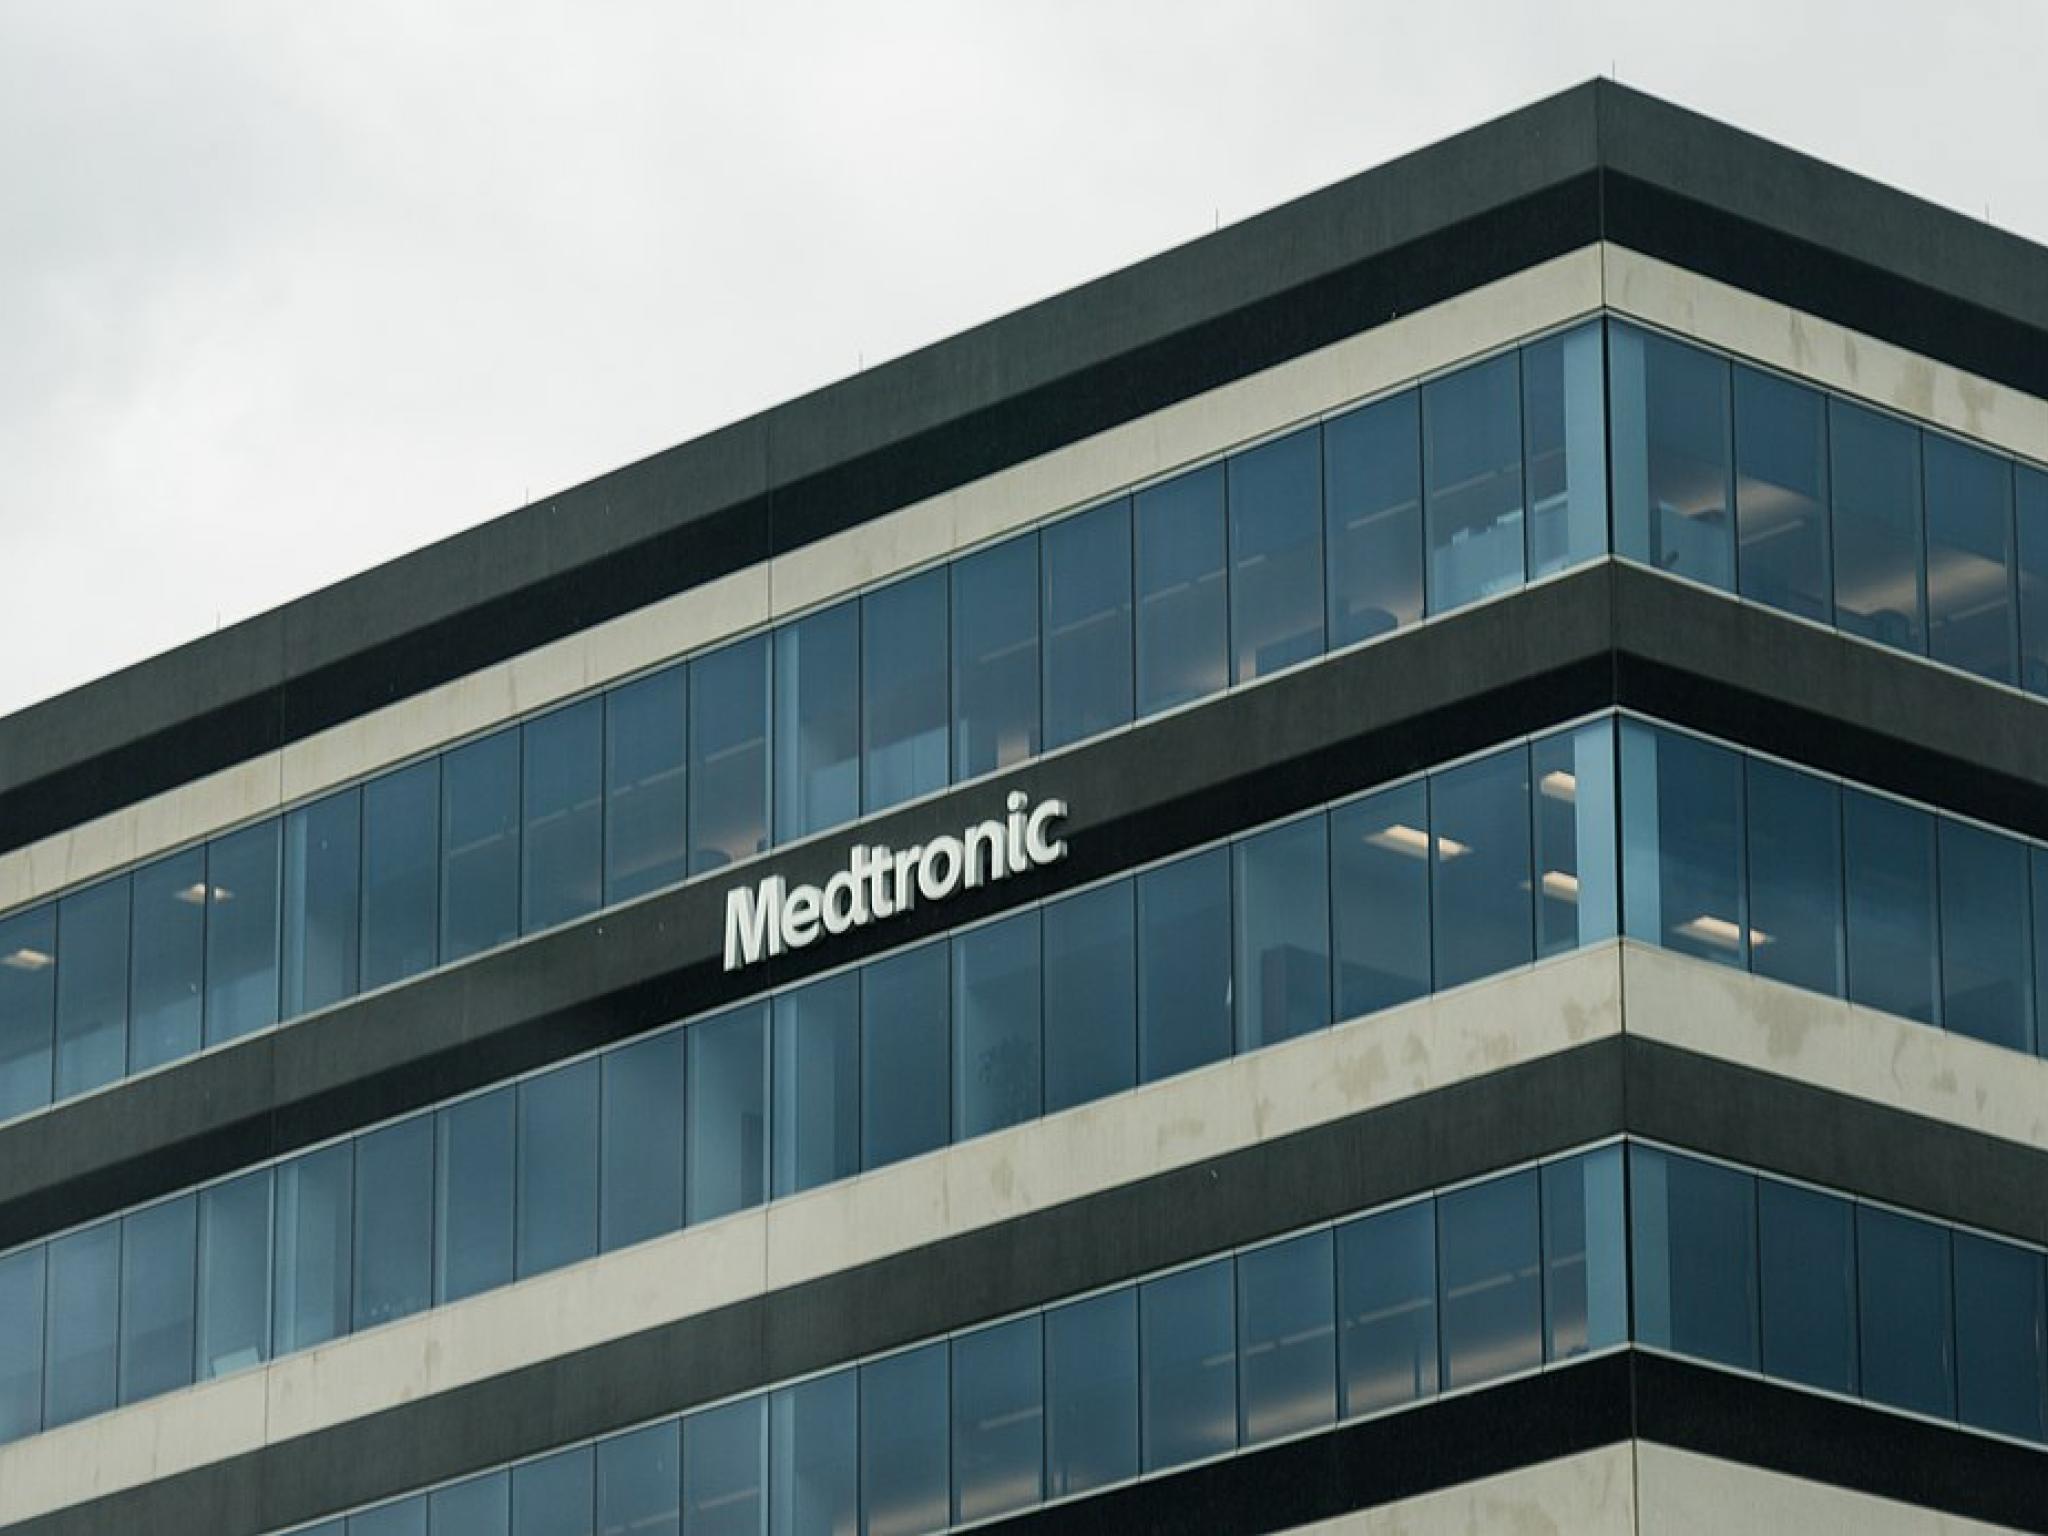  medtronic-recalls-some-versions-of-software-used-for-cranial-surgery 